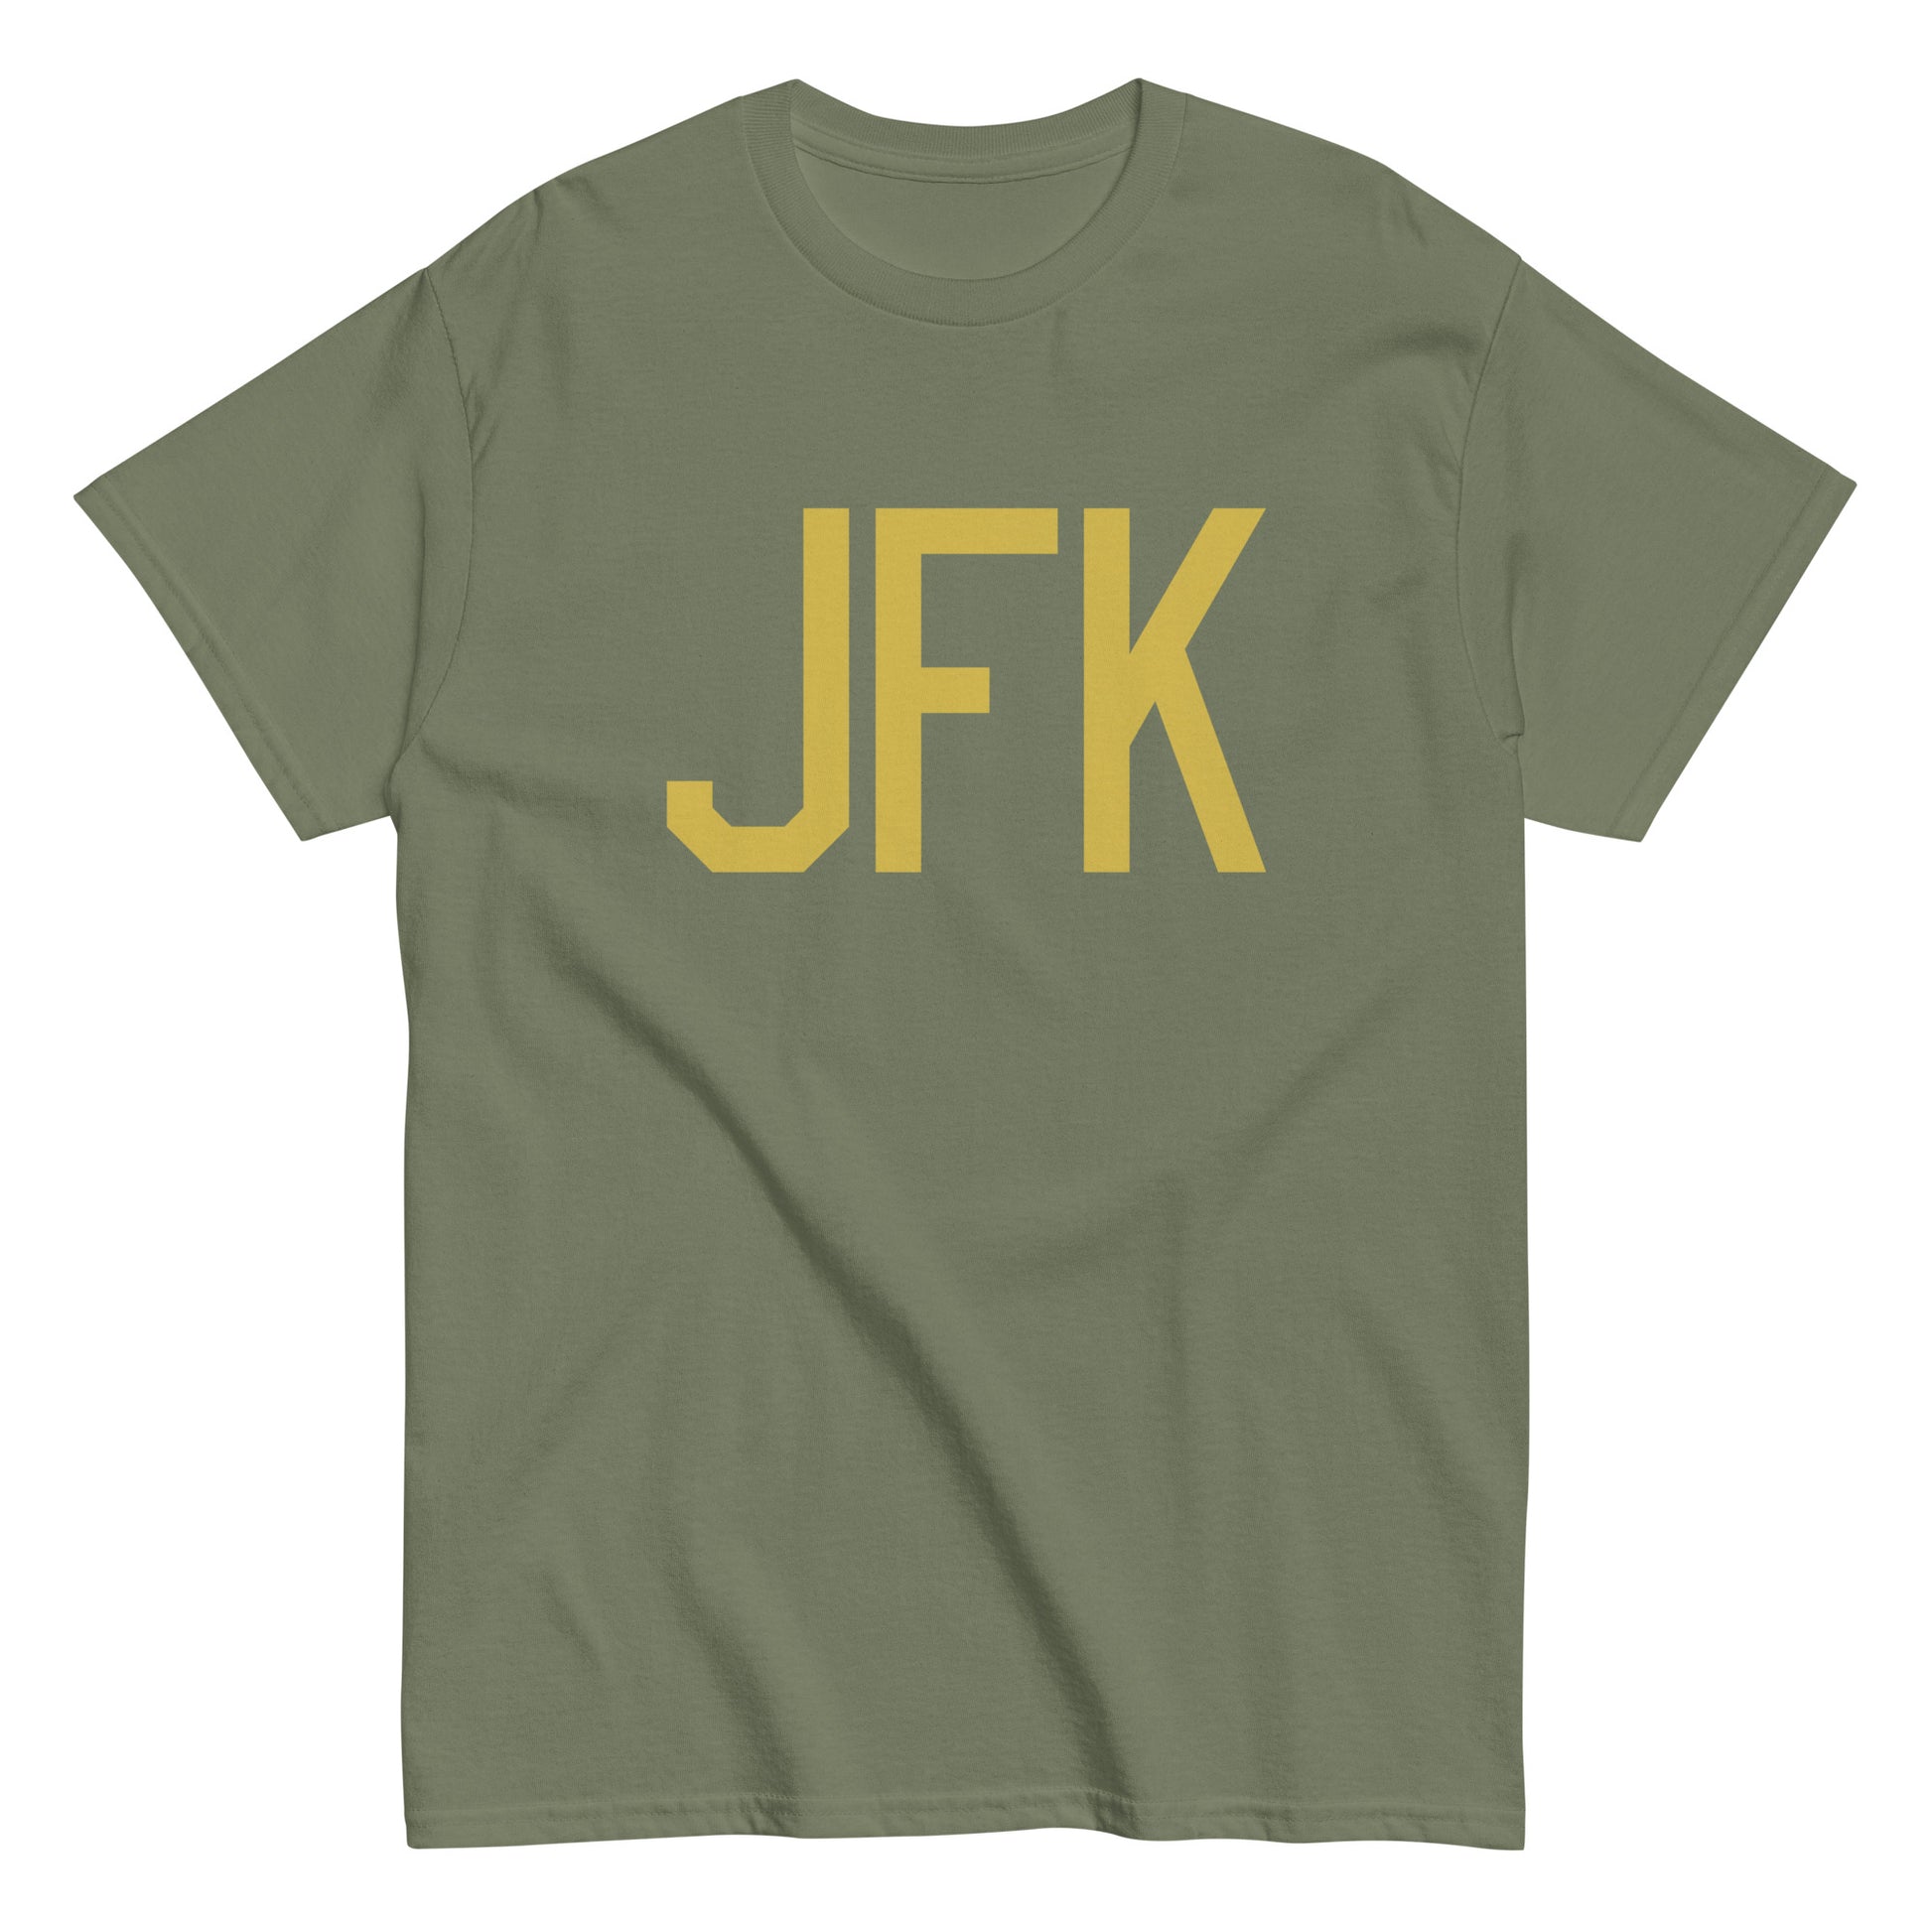 Aviation Enthusiast Men's Tee - Old Gold Graphic • JFK New York City • YHM Designs - Image 02